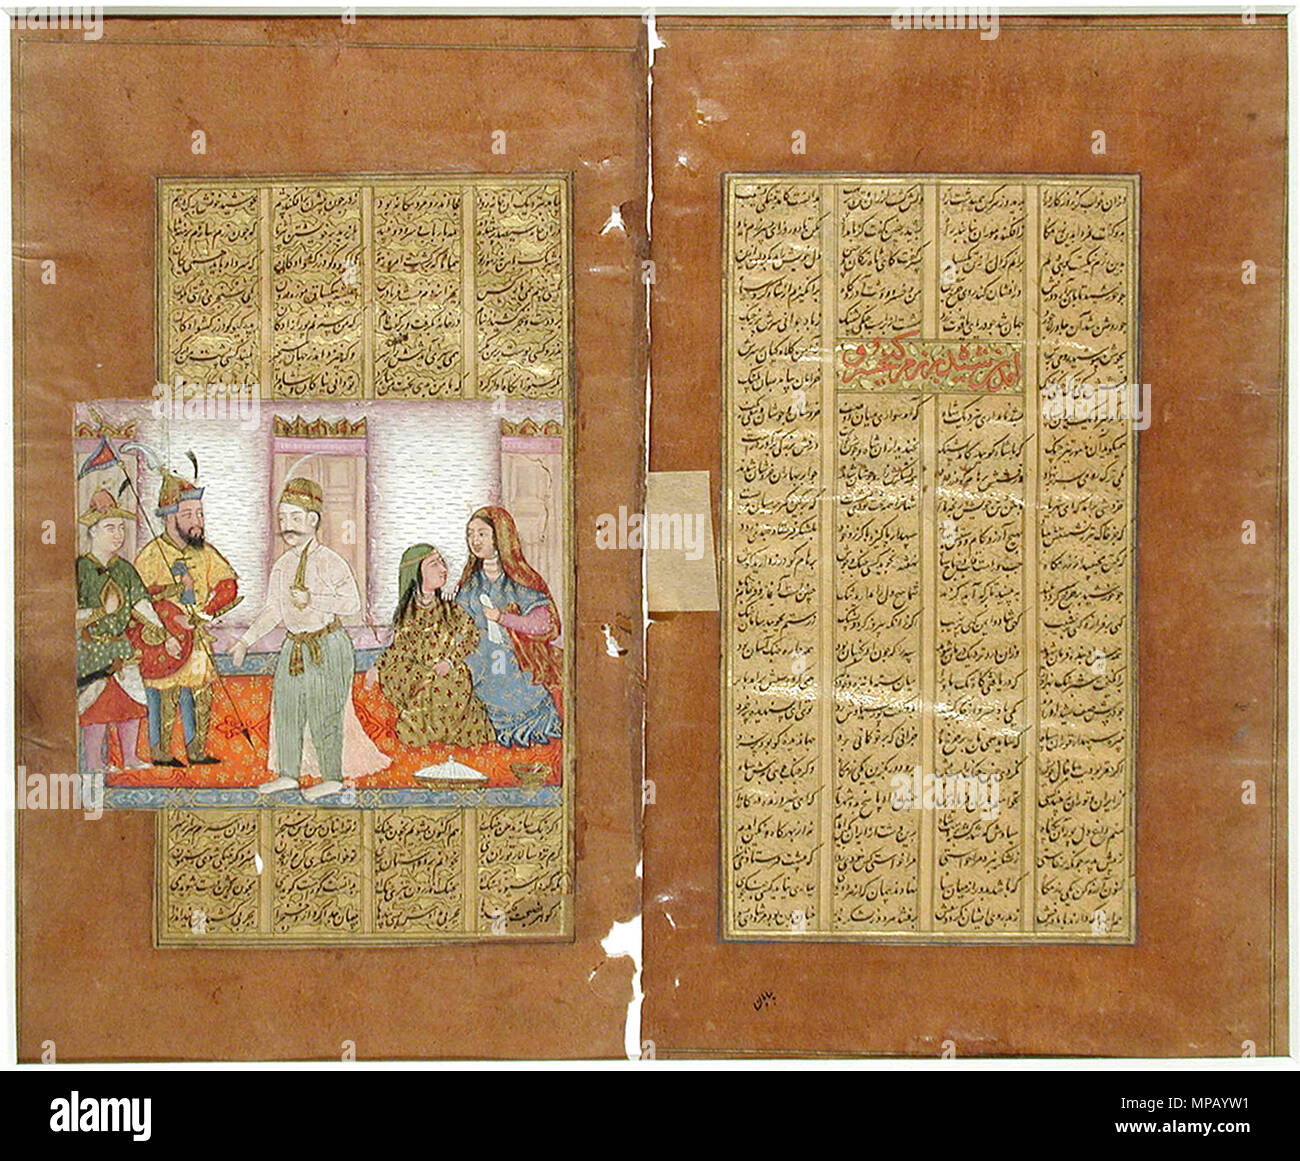 . English: Series Title: Shahnama Creation Date: ca. 1610 Display Dimensions: 8 1/32 in. x 4 19/32 in. (20.4 cm x 11.7 cm) Credit Line: Edwin Binney 3rd Collection Accession Number: 1990.437.1 Collection: <a href='http://www.sdmart.org/art/our-collection/asian-art' rel='nofollow'>The San Diego Museum of Art</a> . 16 October 2001, 10:28:34. English: thesandiegomuseumofartcollection 1041 Rakhsh fights the lion to protect Rustam (6124540965) Stock Photo